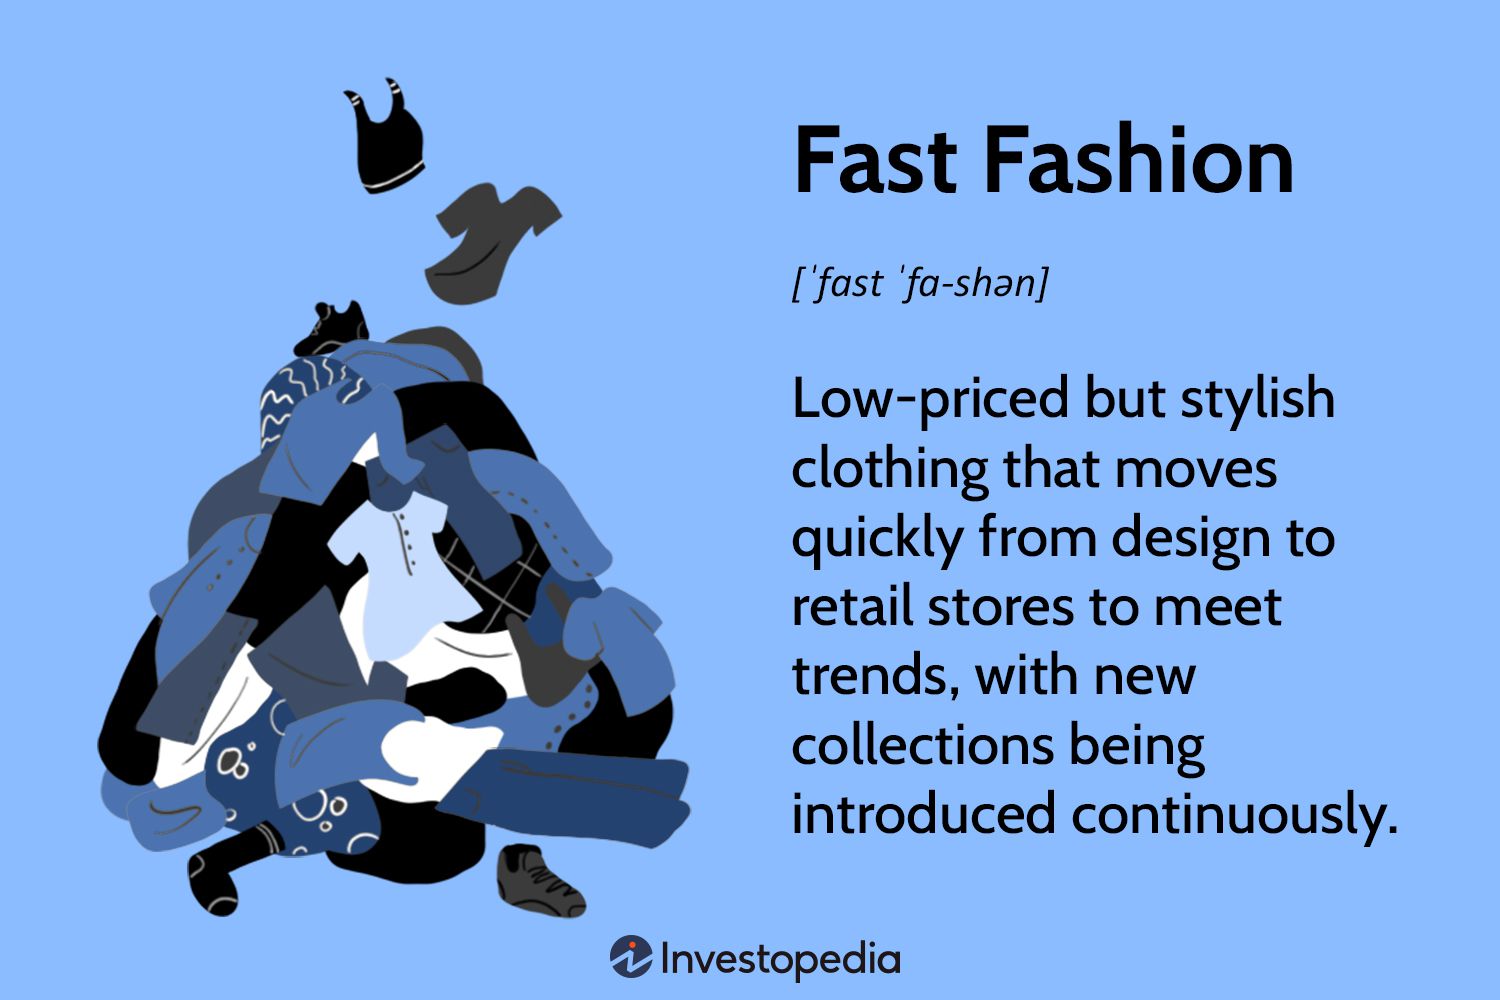 Fast Fashion Explained and How It Impacts Retail Manufacturing - Topic ...